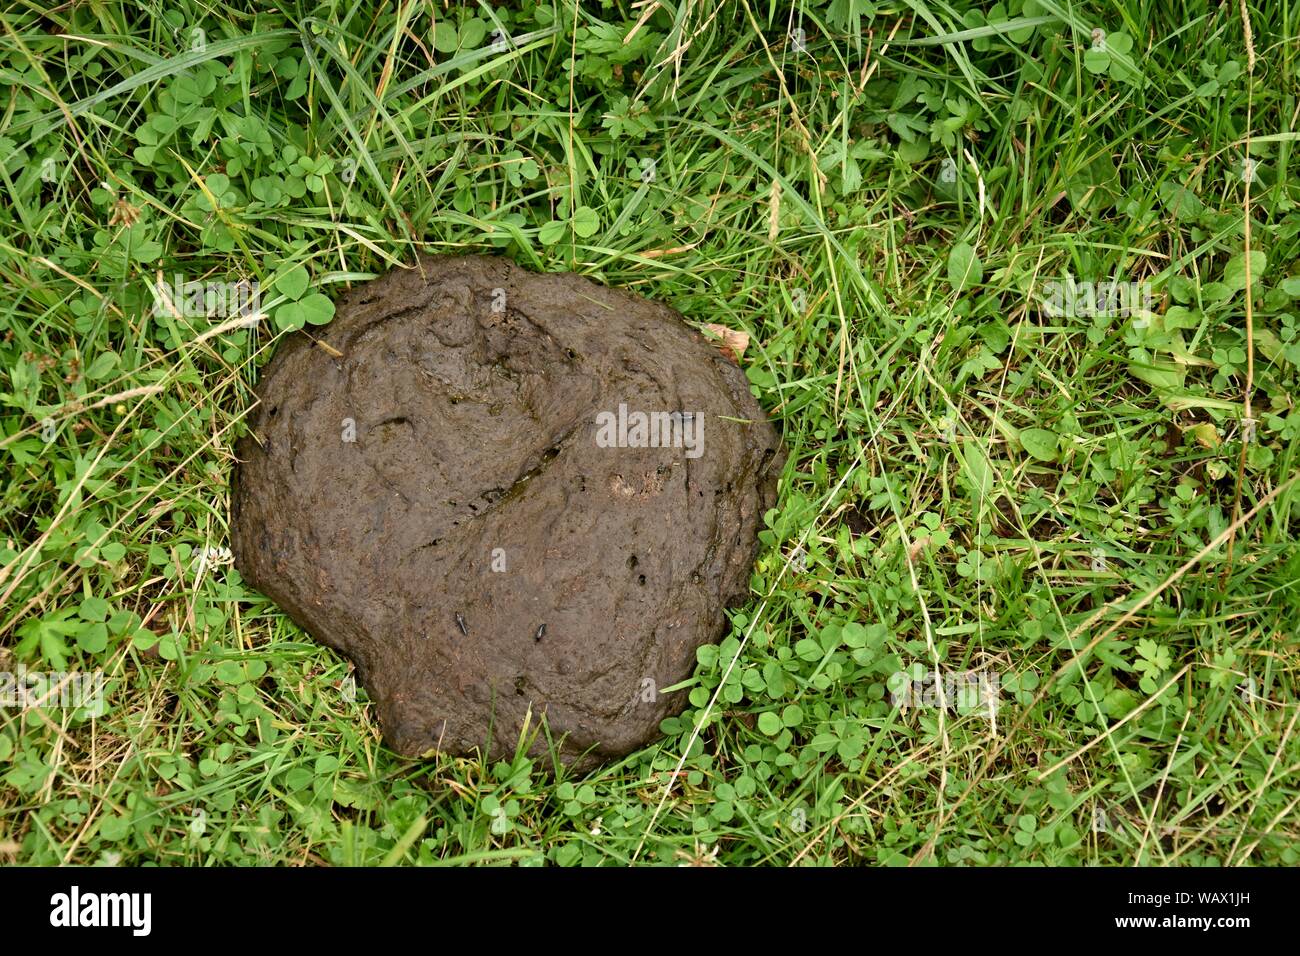 Cow excrement on the green grass in the forest. Stock Photo